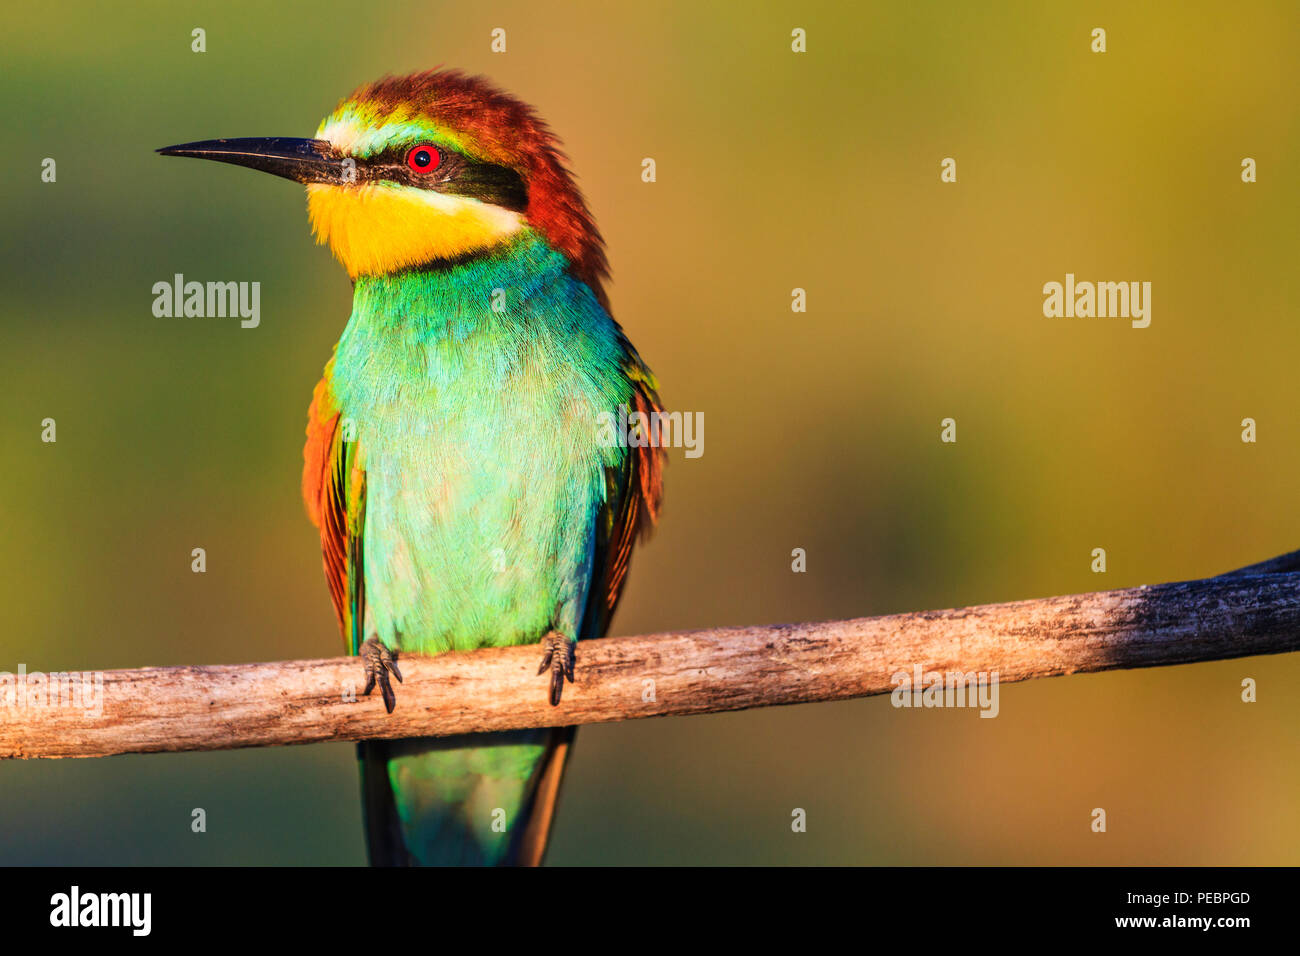 paradise colored bird sitting on a branch illuminated by the summer sun Stock Photo